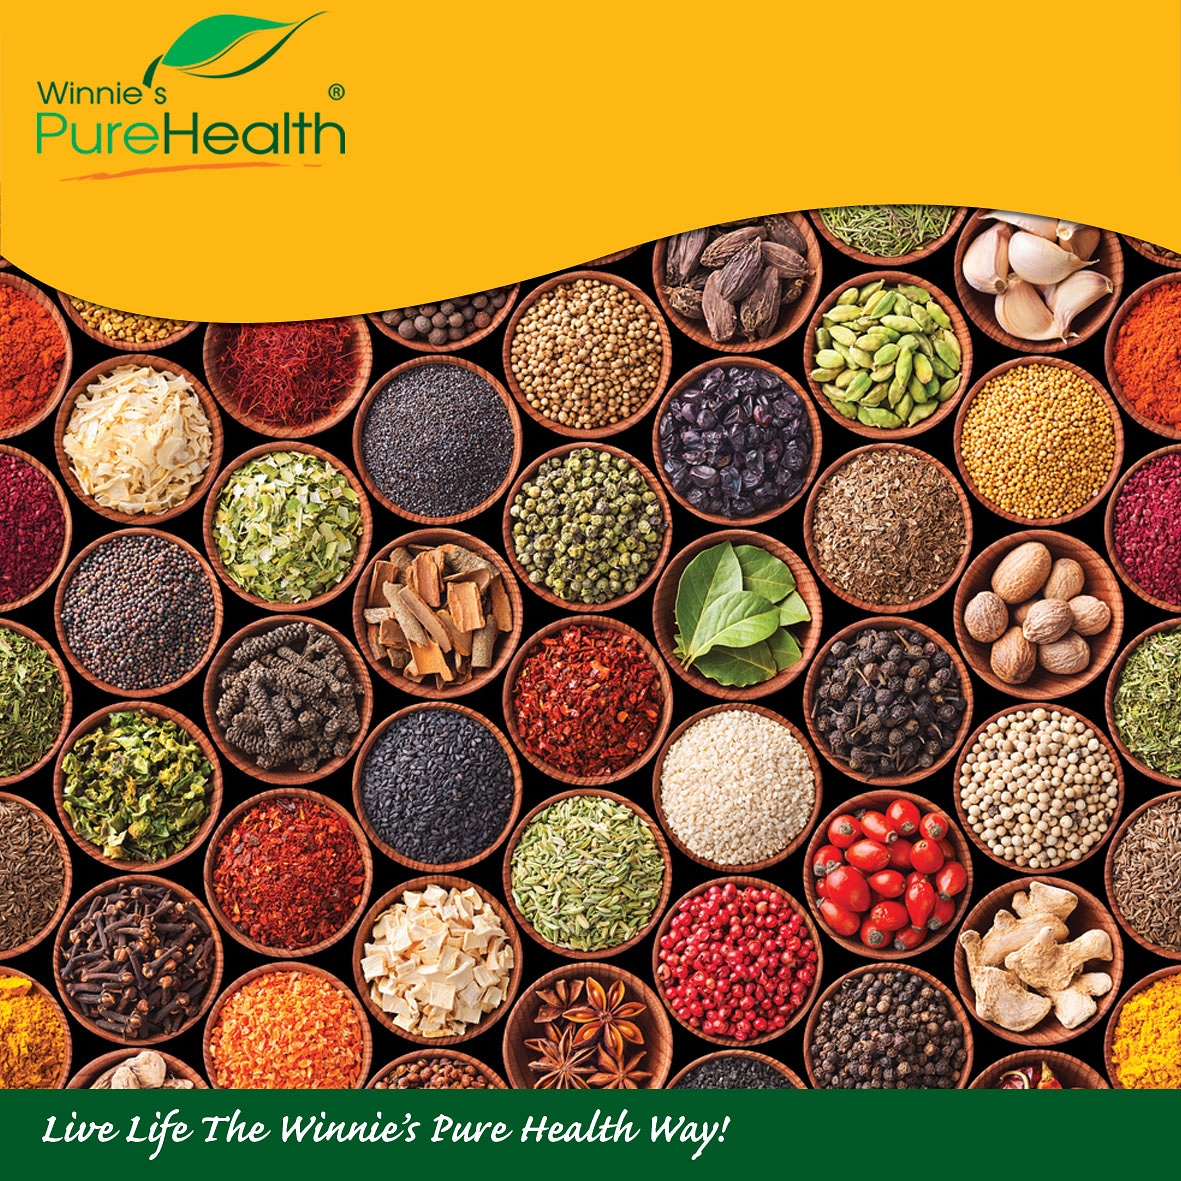 Besides herbs and spices adding flavor to food, they also contain #antioxidants and some #antimicrobial properties that help improve immunity

#herbs #spices #foodflavor #healthychoice #healthychanges #healthyliving #FridayMotivation #FridayThoughts #healthtips #WinniesPureHealth